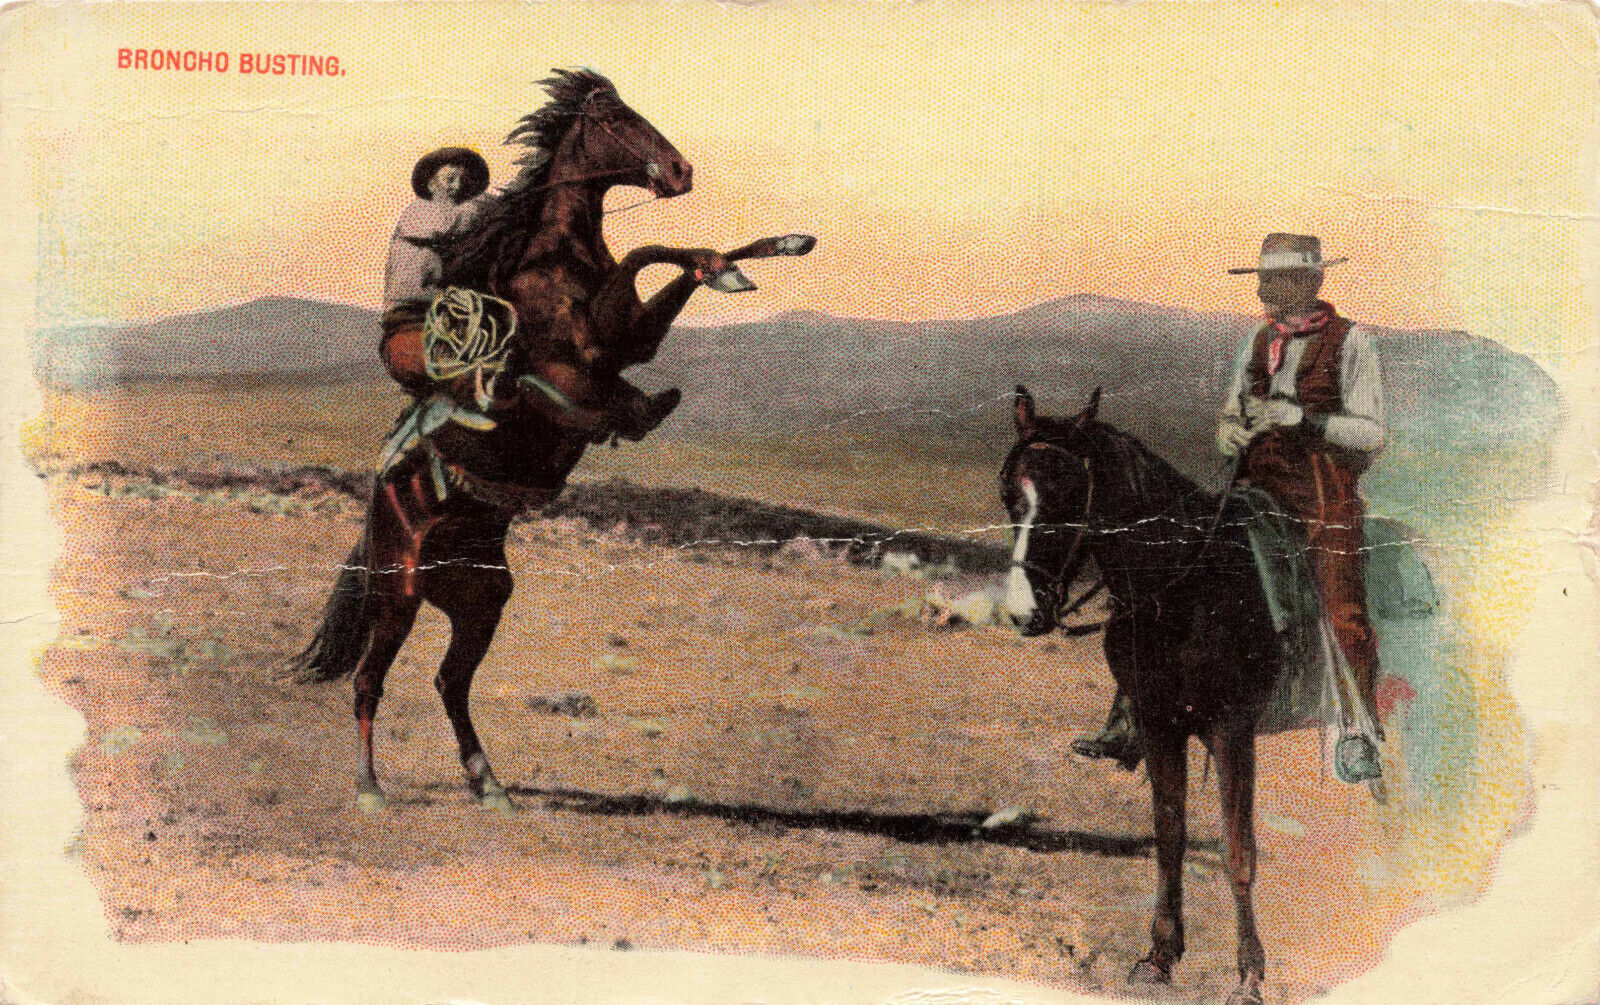 021322 VINTAGE COWBOY POSTCARD BRONCO BUSTING TWO COWBOYS WITH HORSES 1913